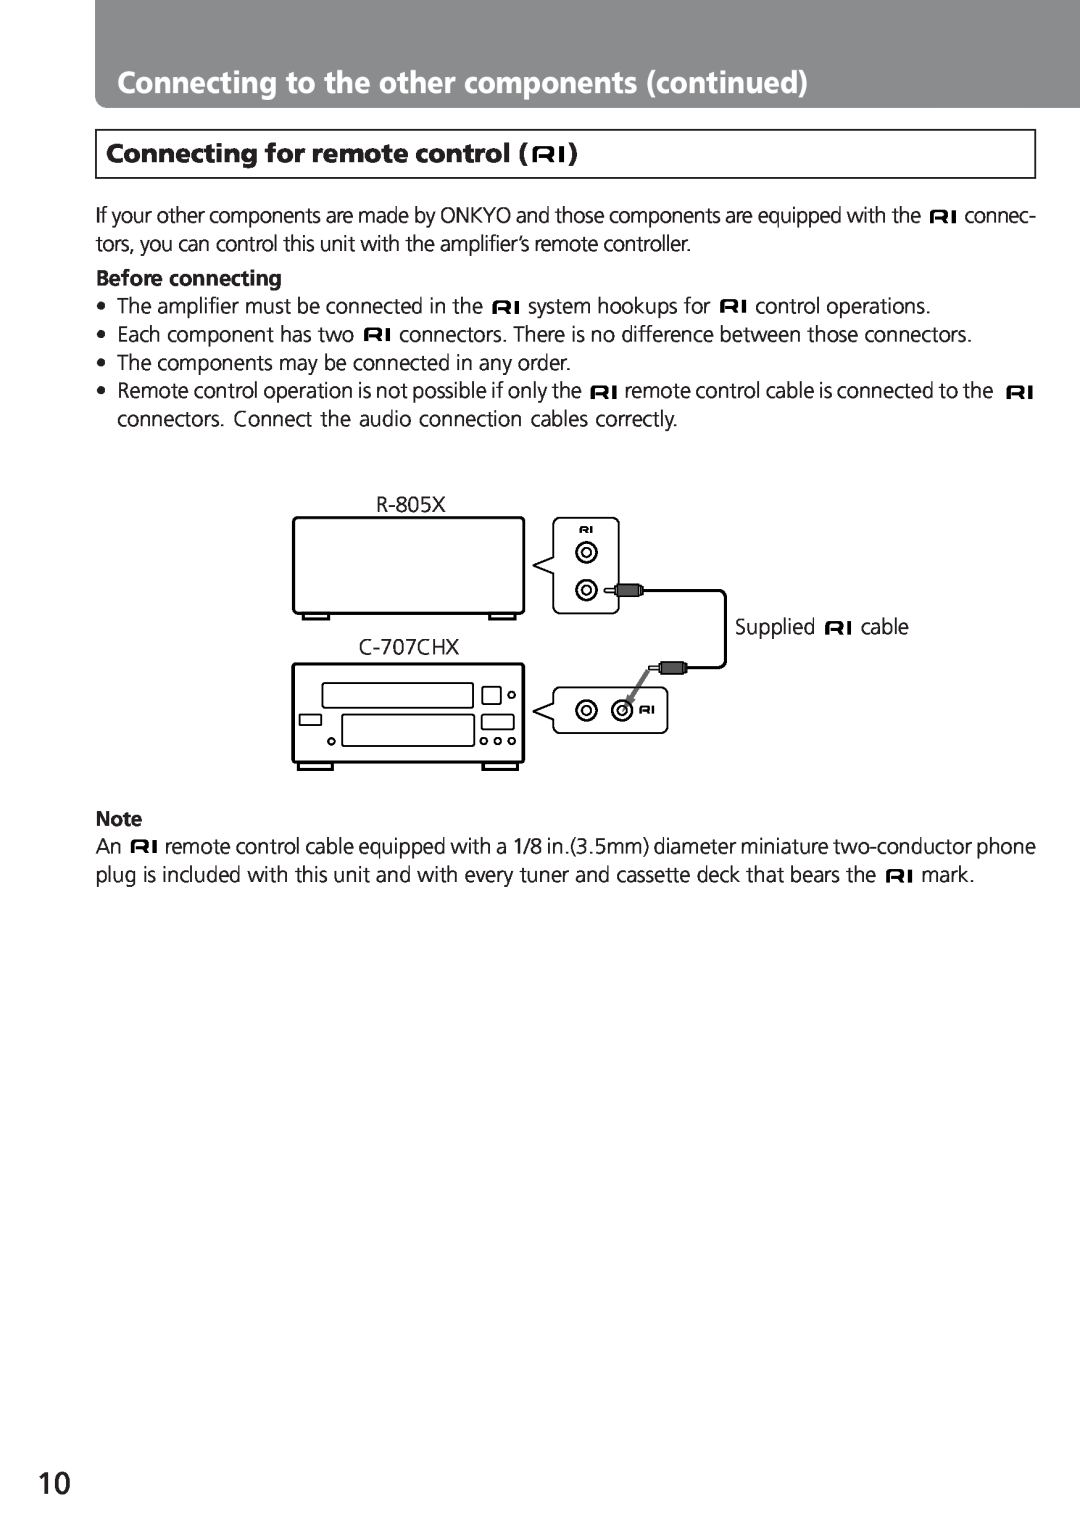 Onkyo C-707CHX instruction manual Connecting to the other components continued, Connecting for remote control 